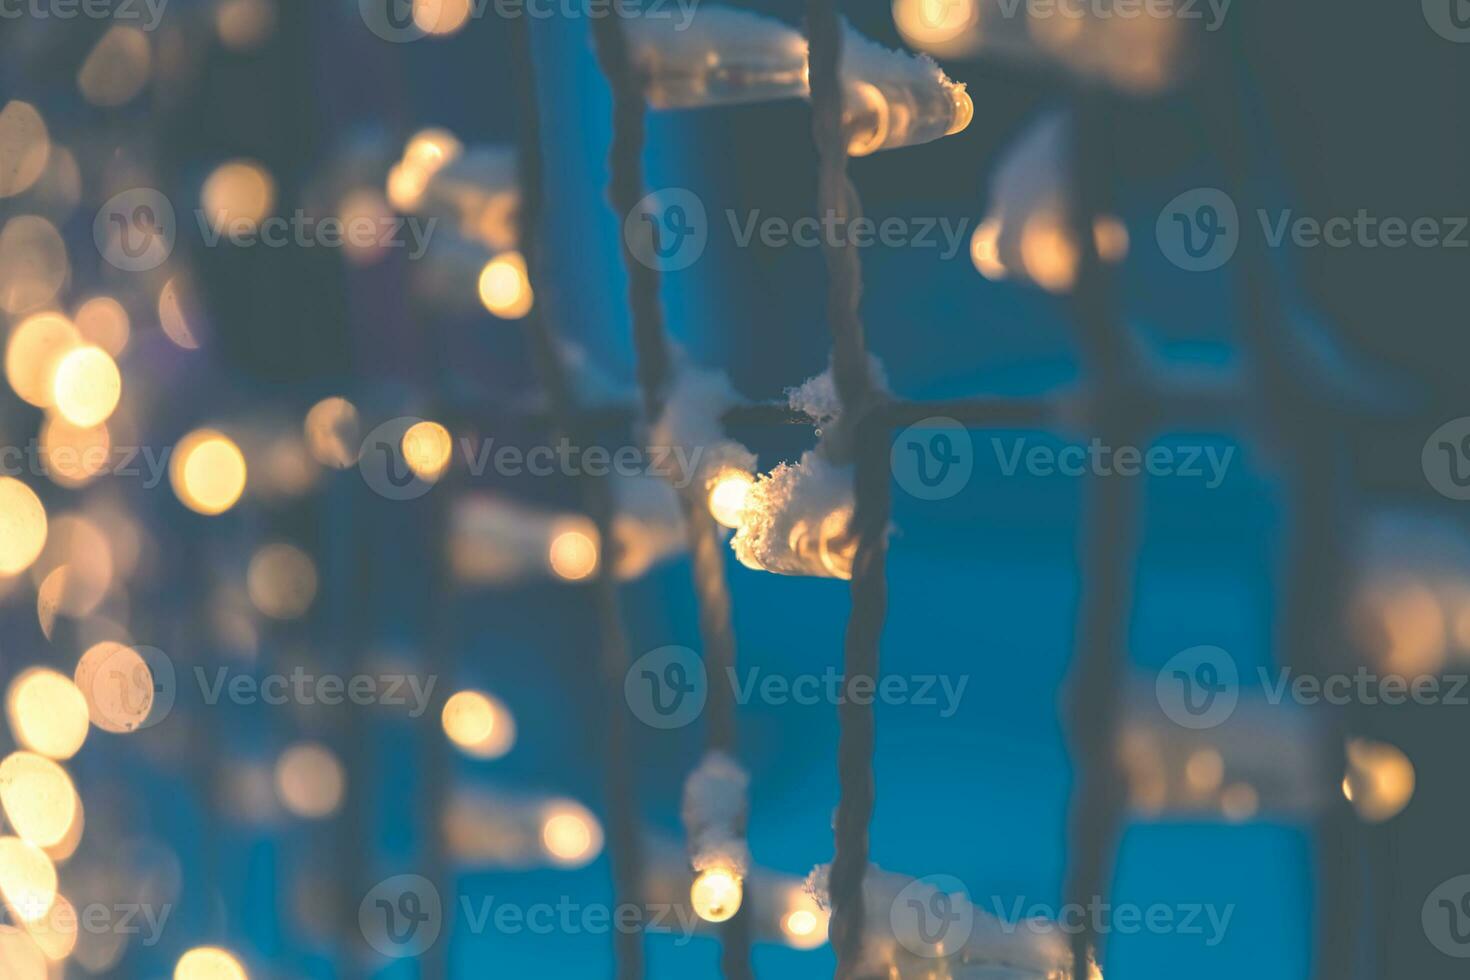 Navy blue color blurred background with shiny gold garland lights photo